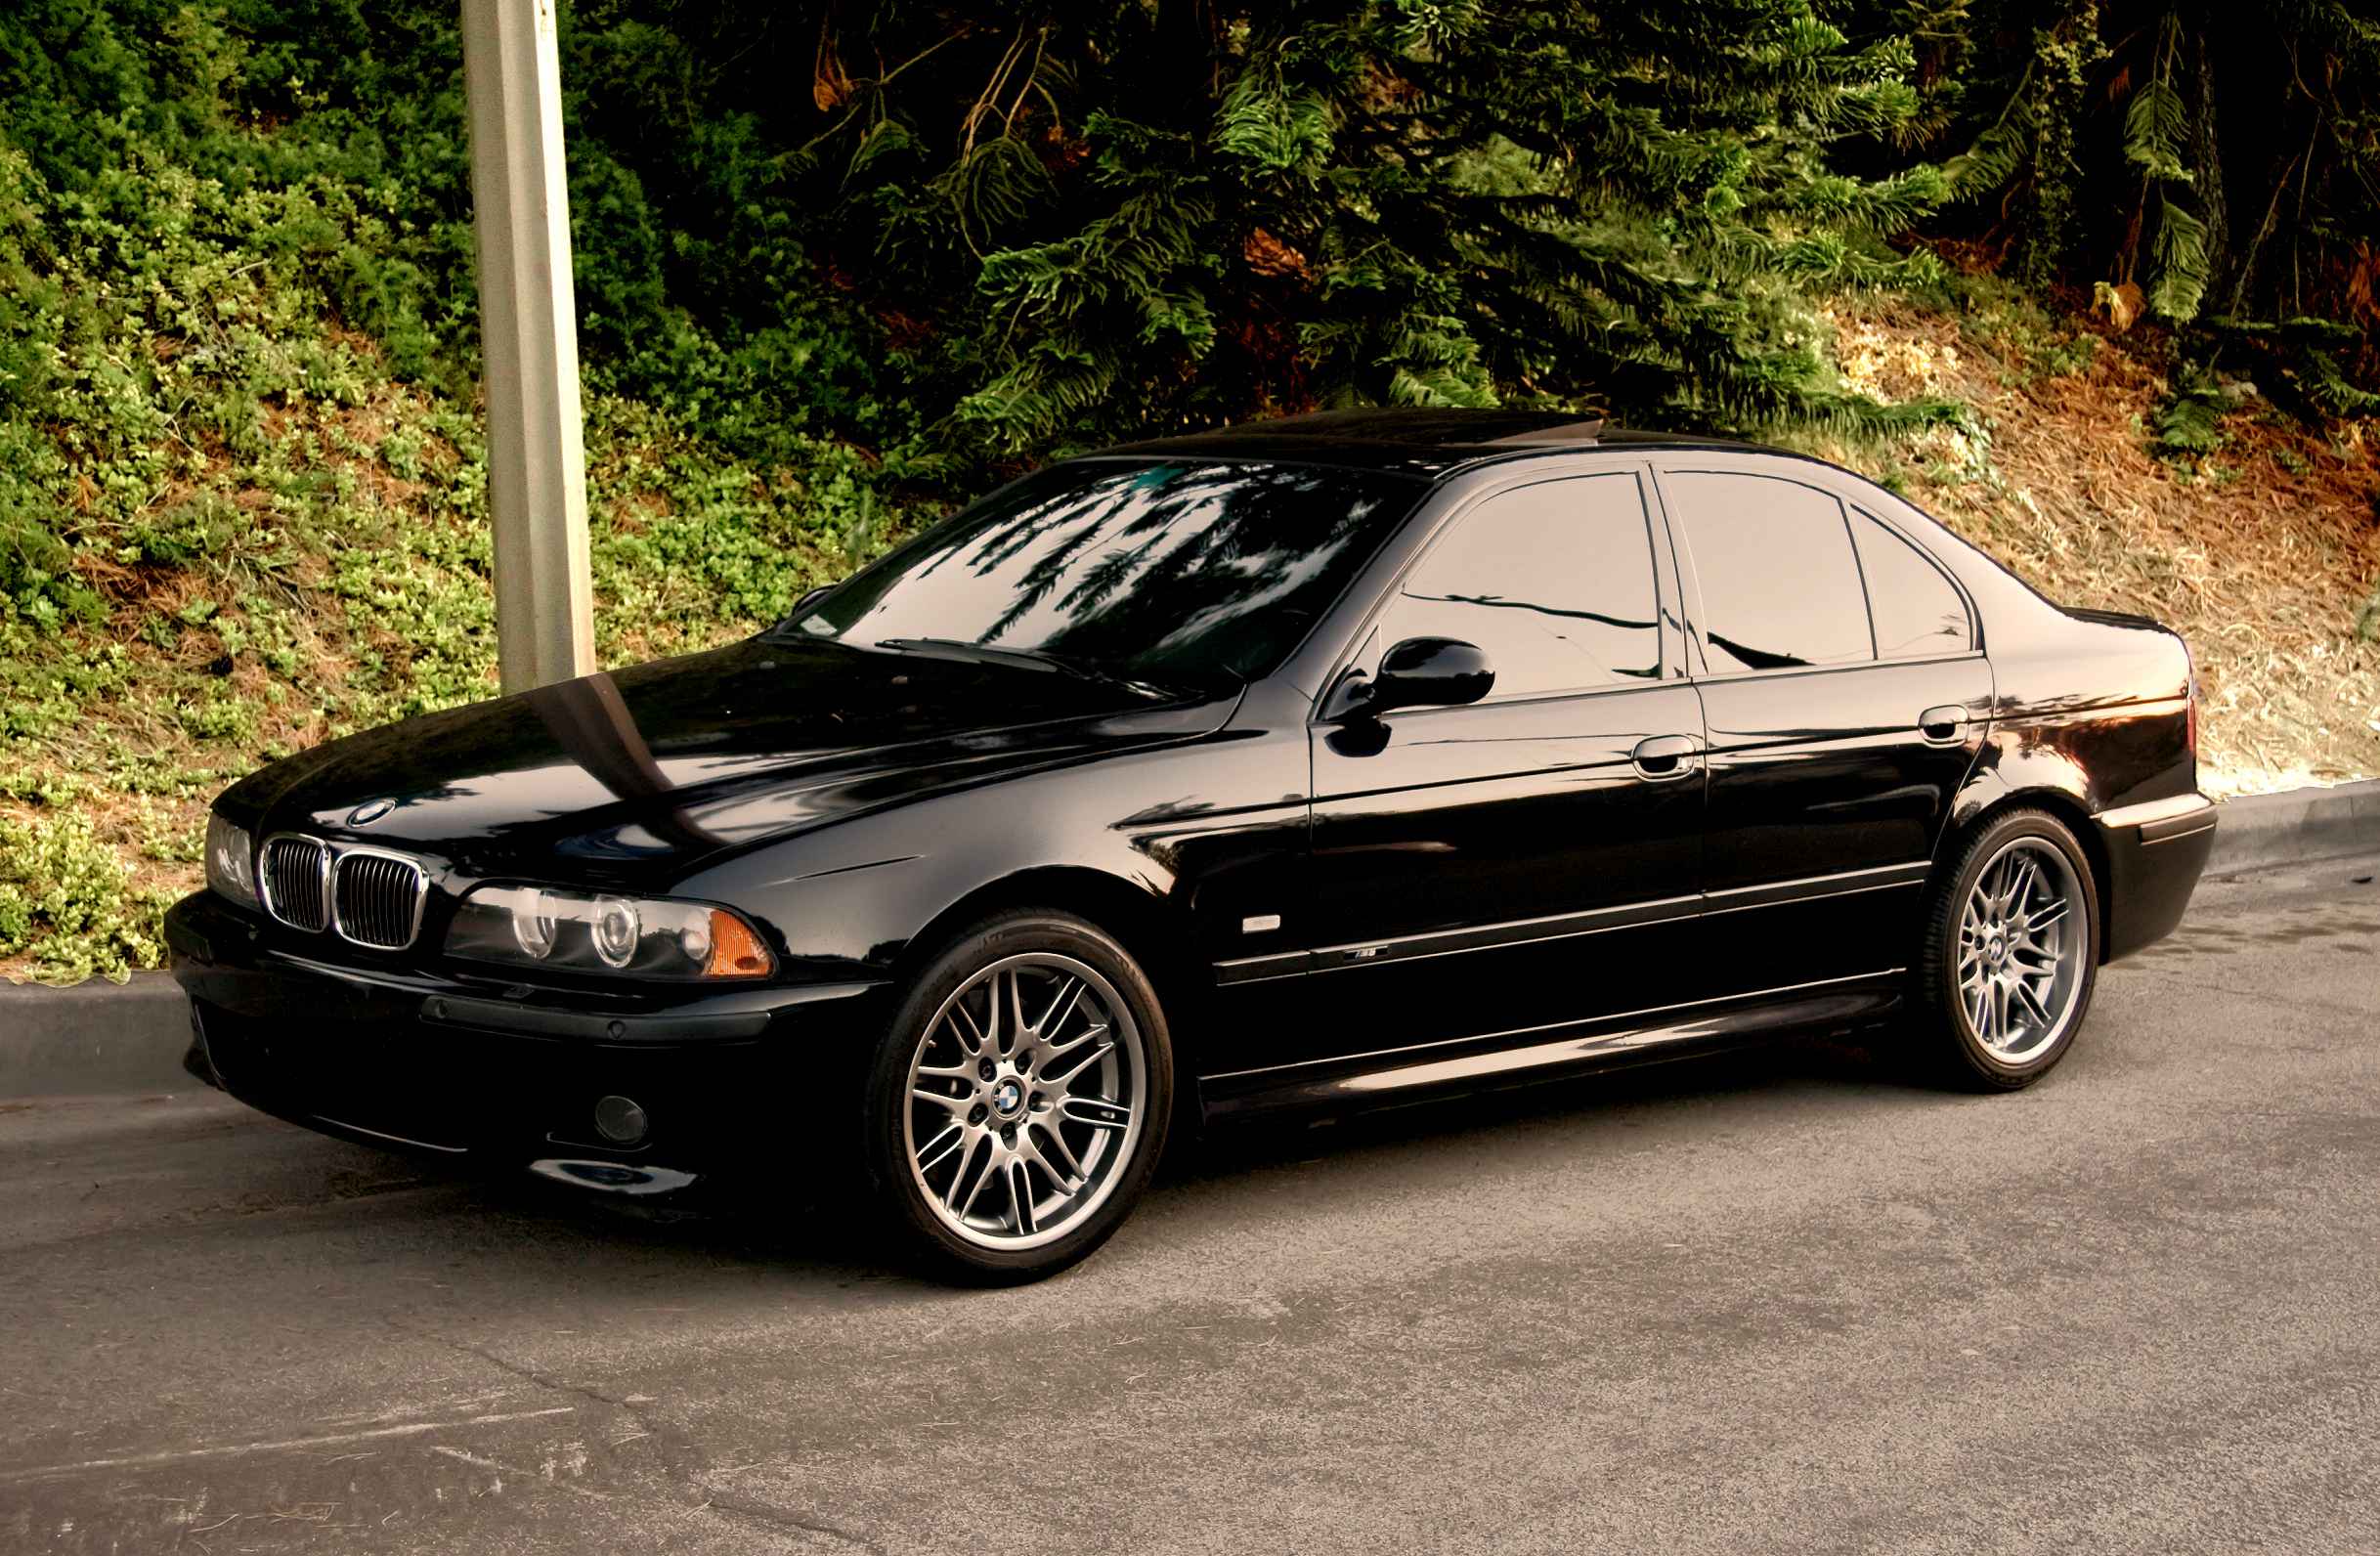 Why The E39 Bmw M5 Is Better Than C5 Audi Rs6